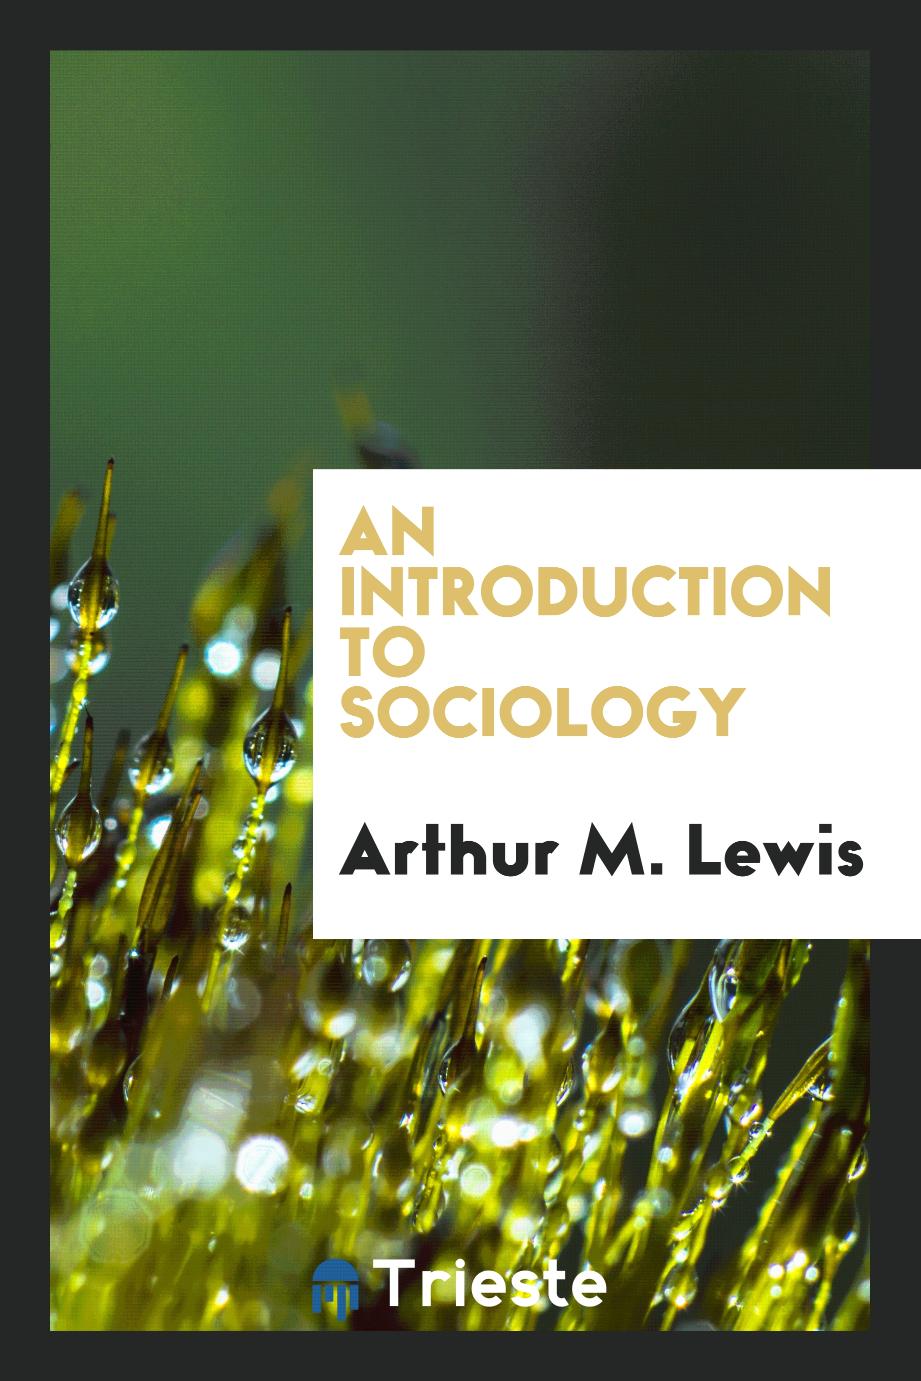 An introduction to sociology